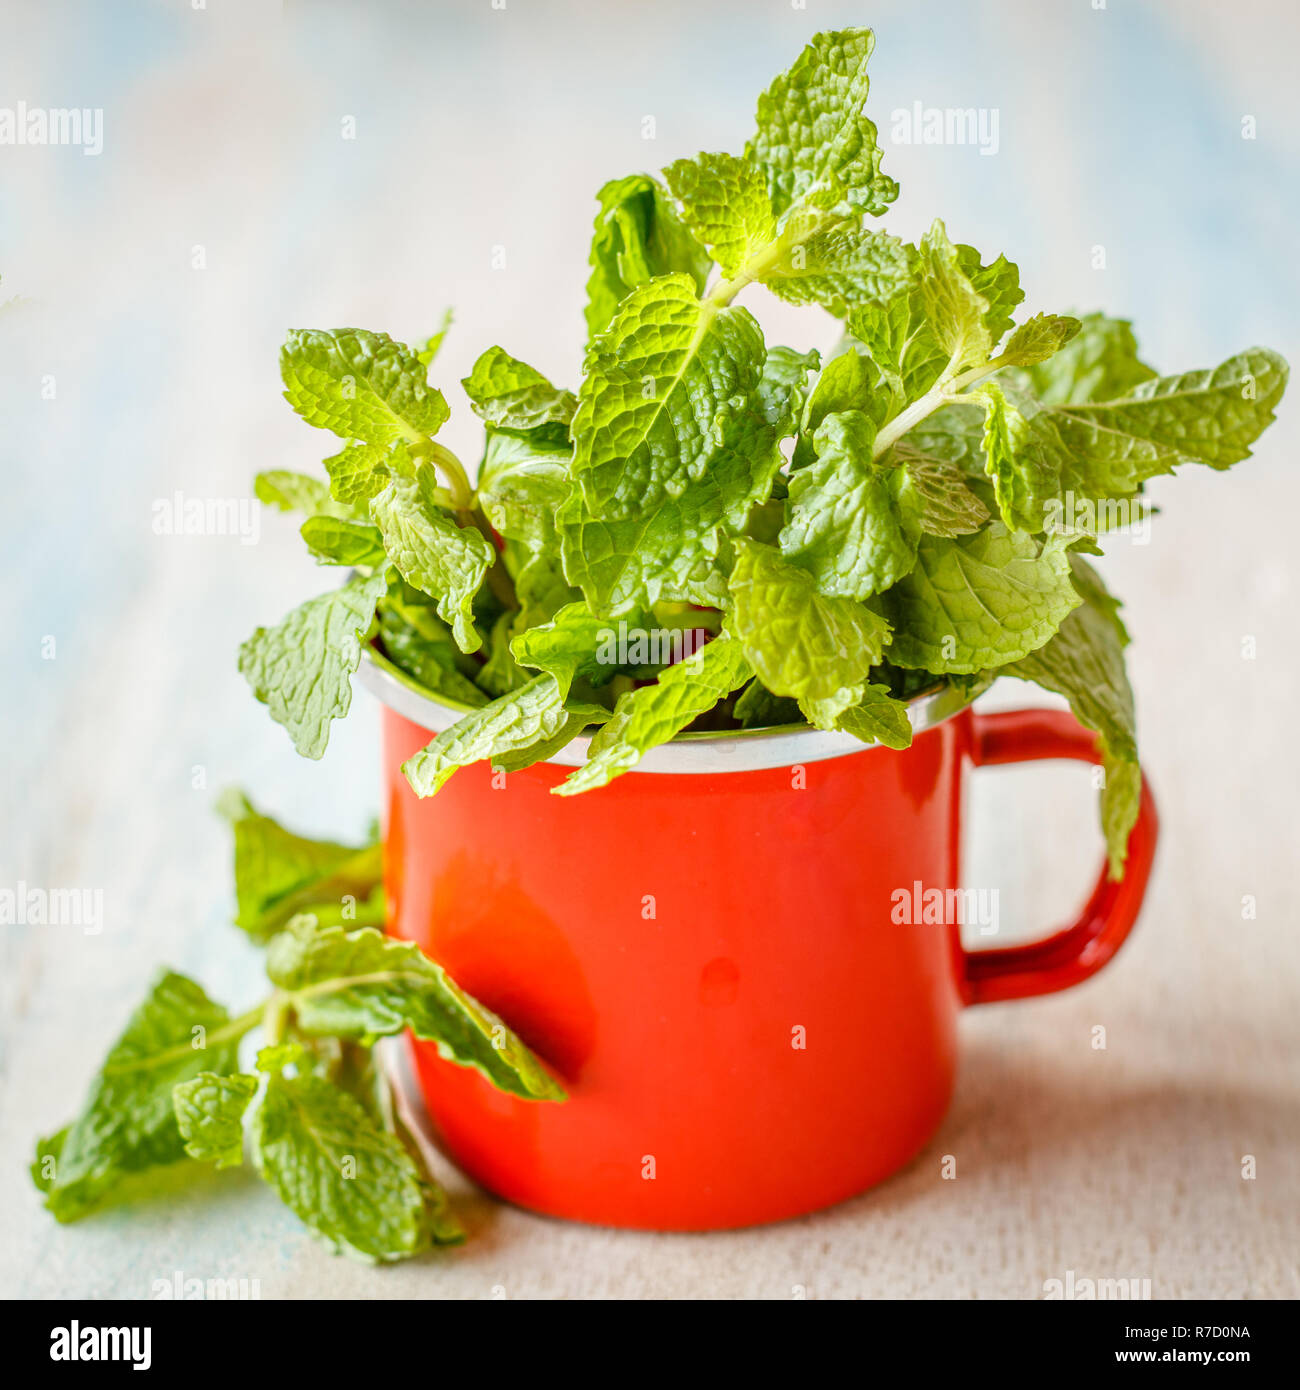 Fresh mint in a small red enameled cup on a wooden white and blue washed surface. Square image Stock Photo